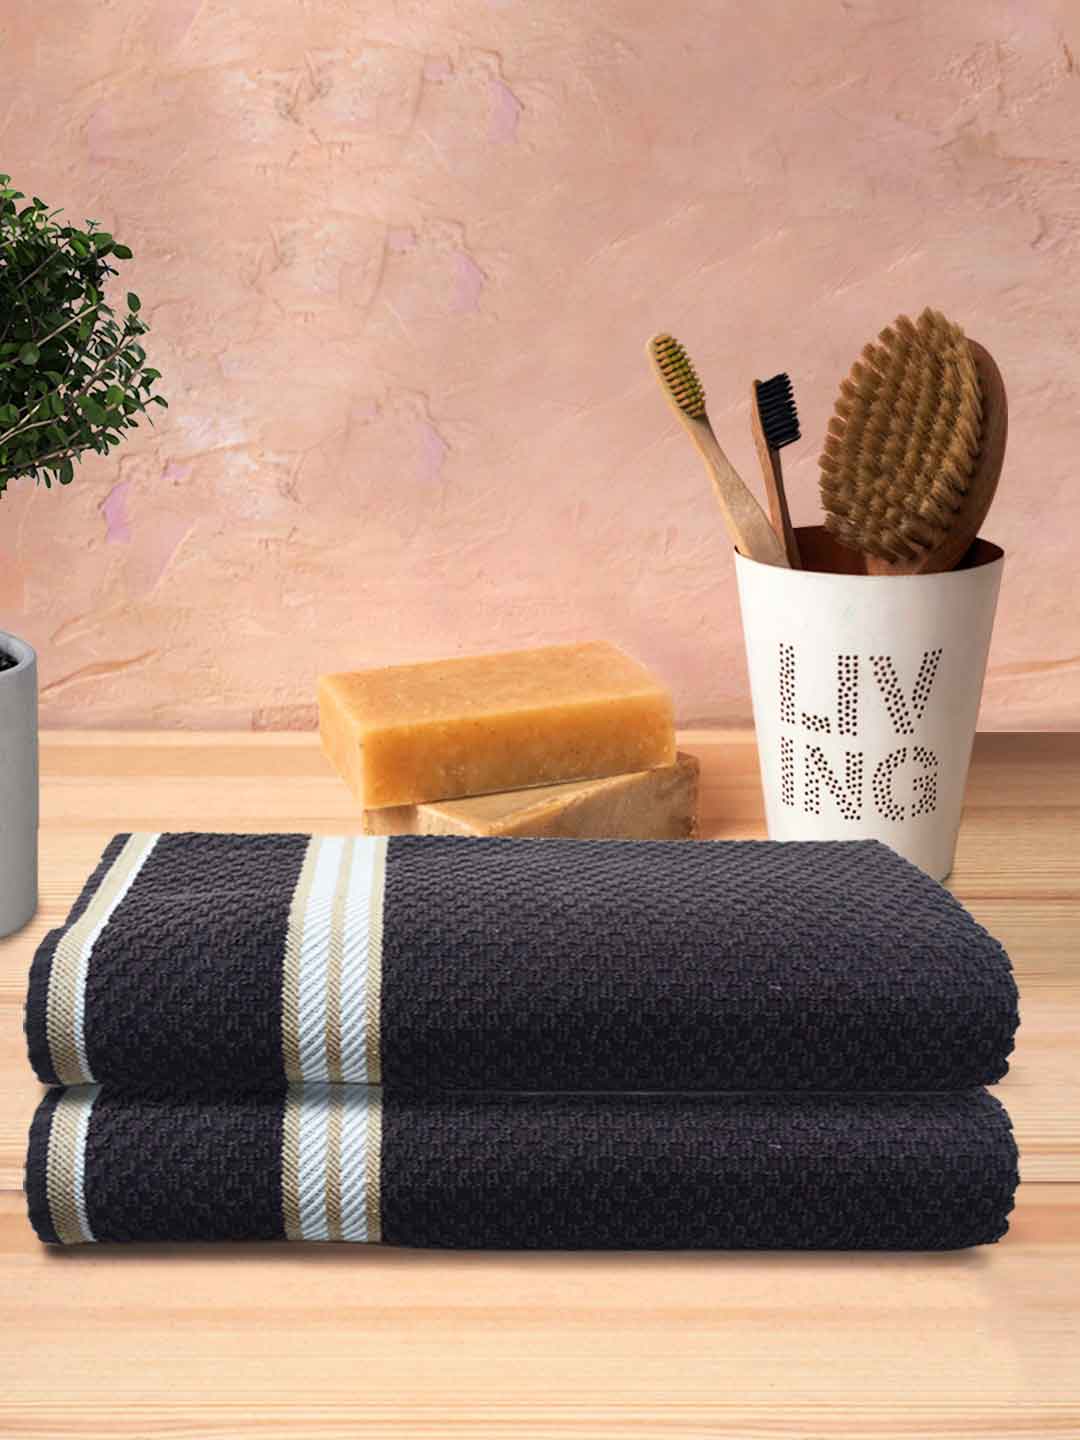 Athom Living Popcorn Textured Solid Bath Towel Brown 67x137 Cm Pack Of 2